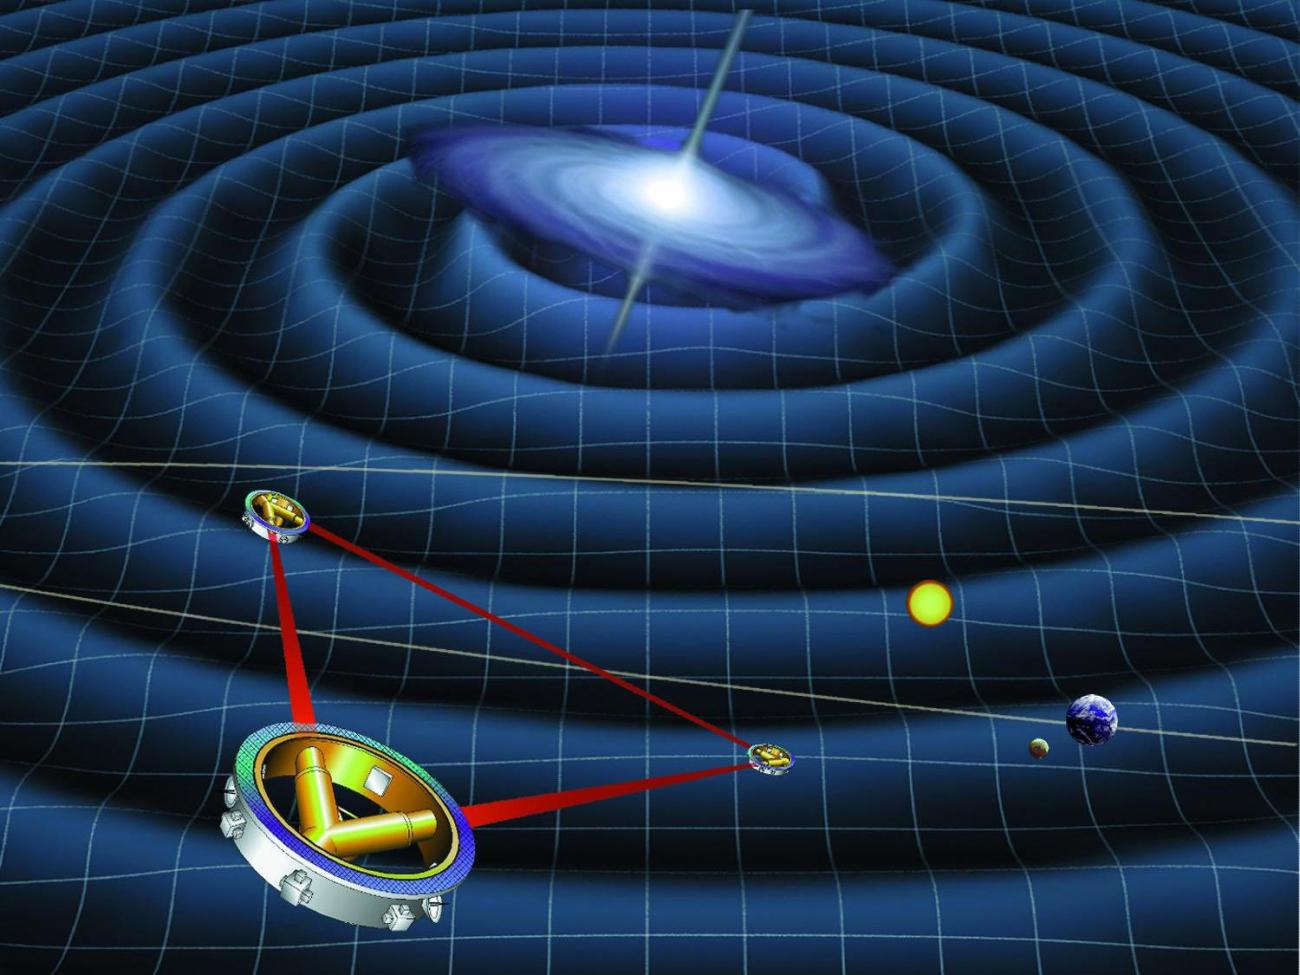 An artists impression of the propagation of gravitational waves through space